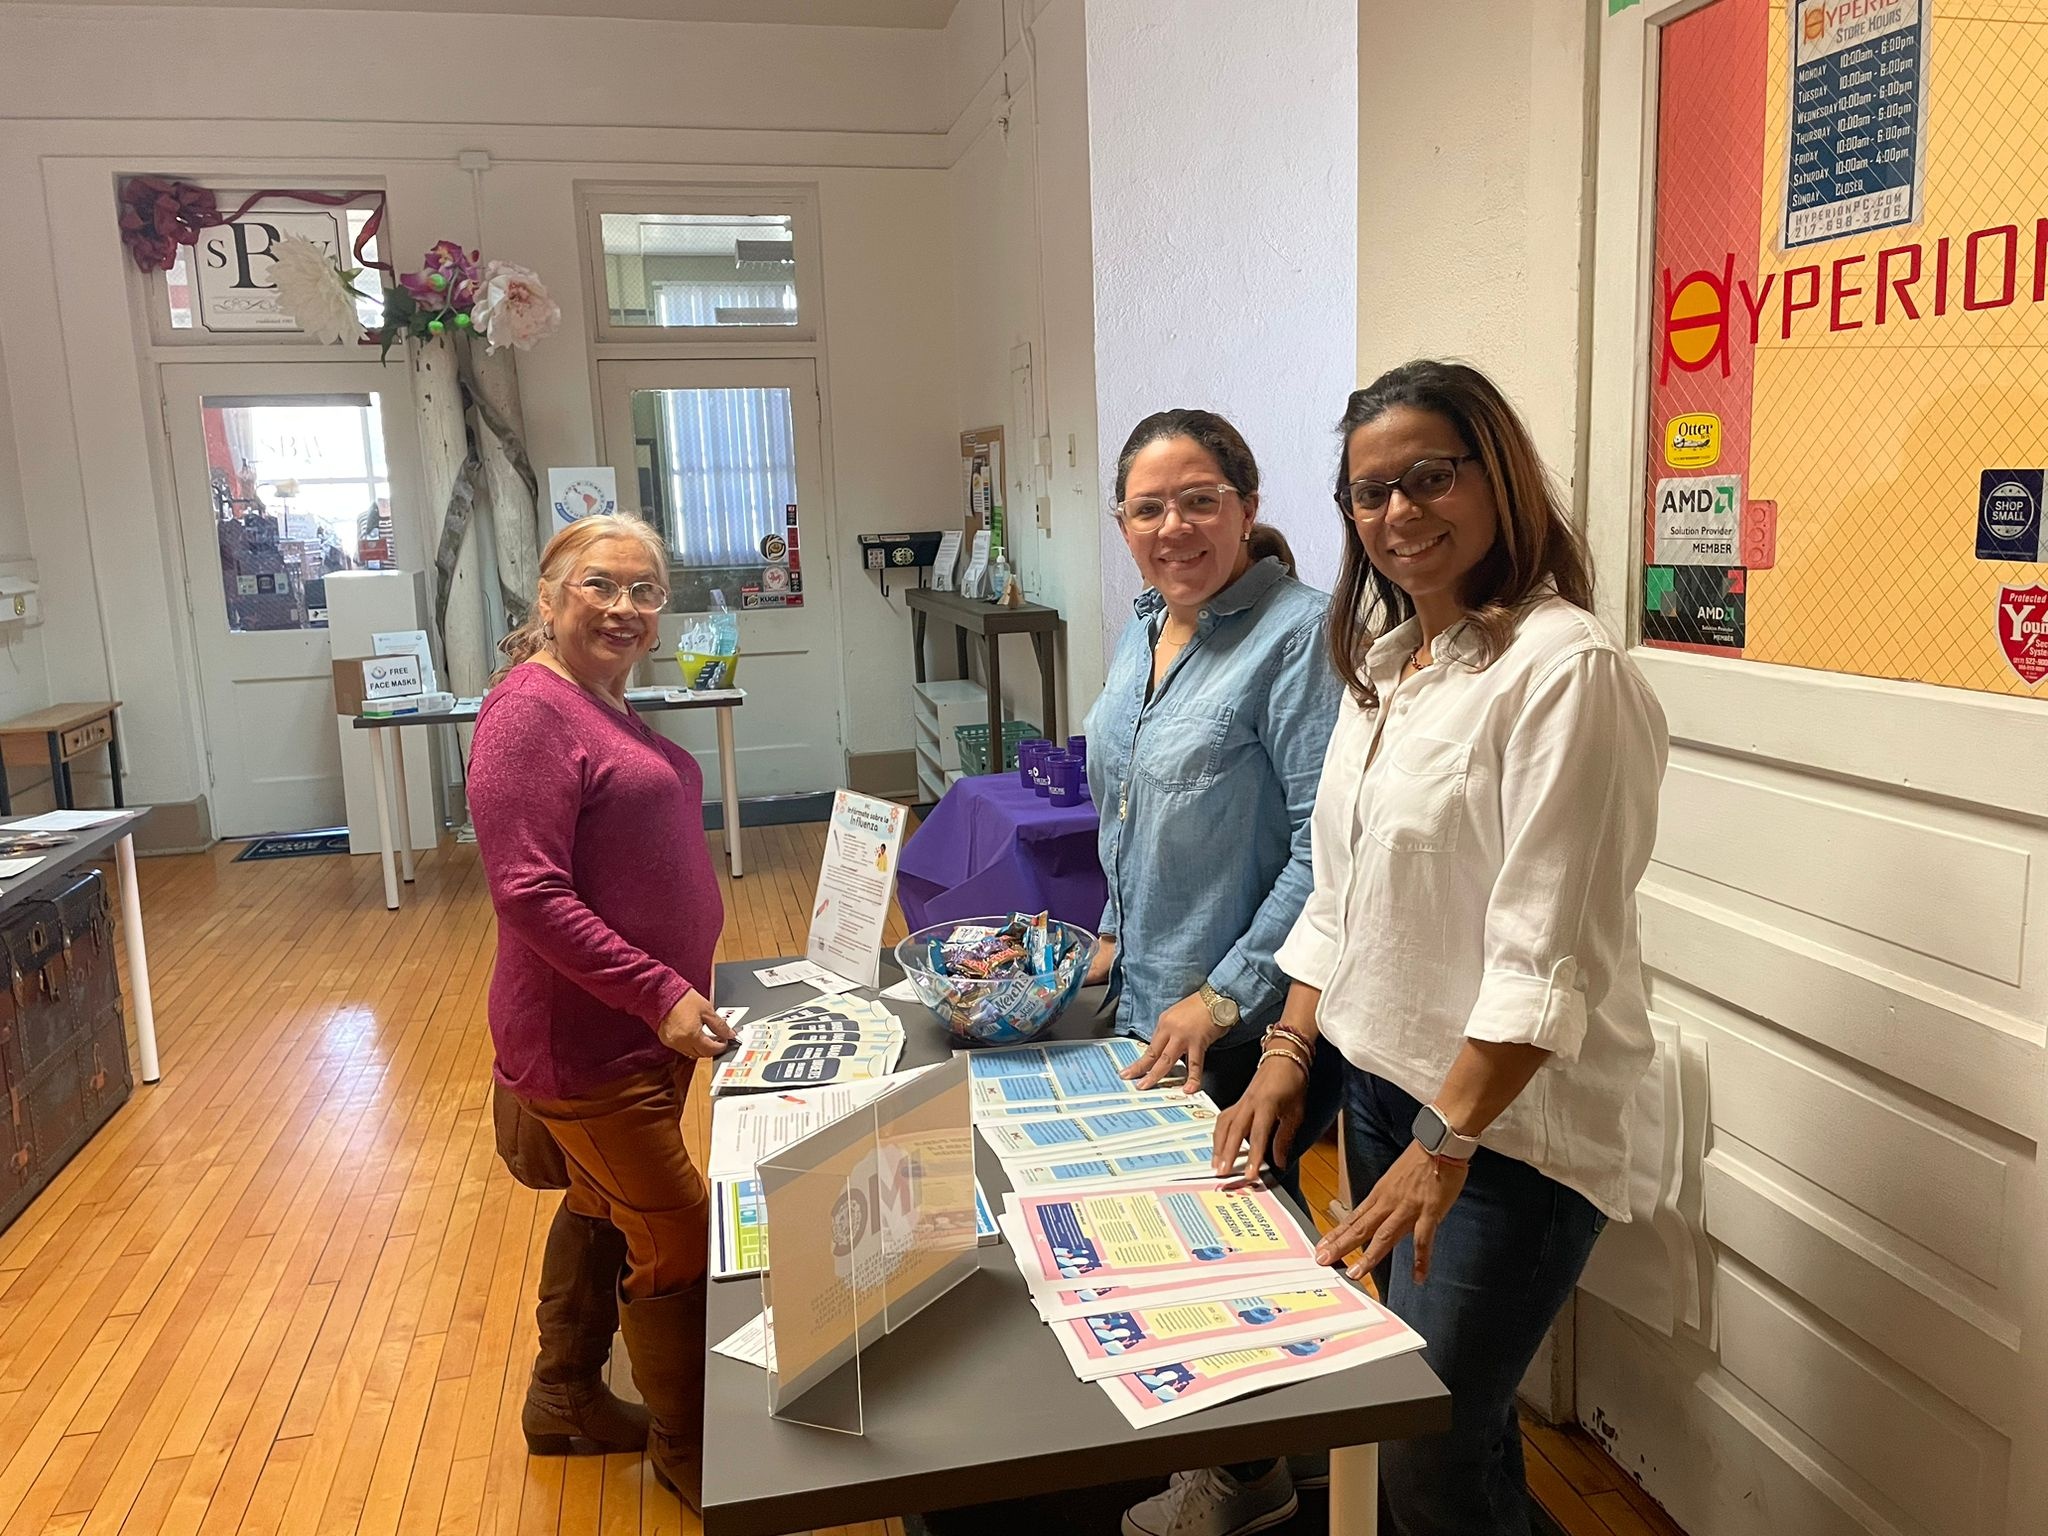 A group of three women of color smile and stand around a table displaying educational materials about vaccines.